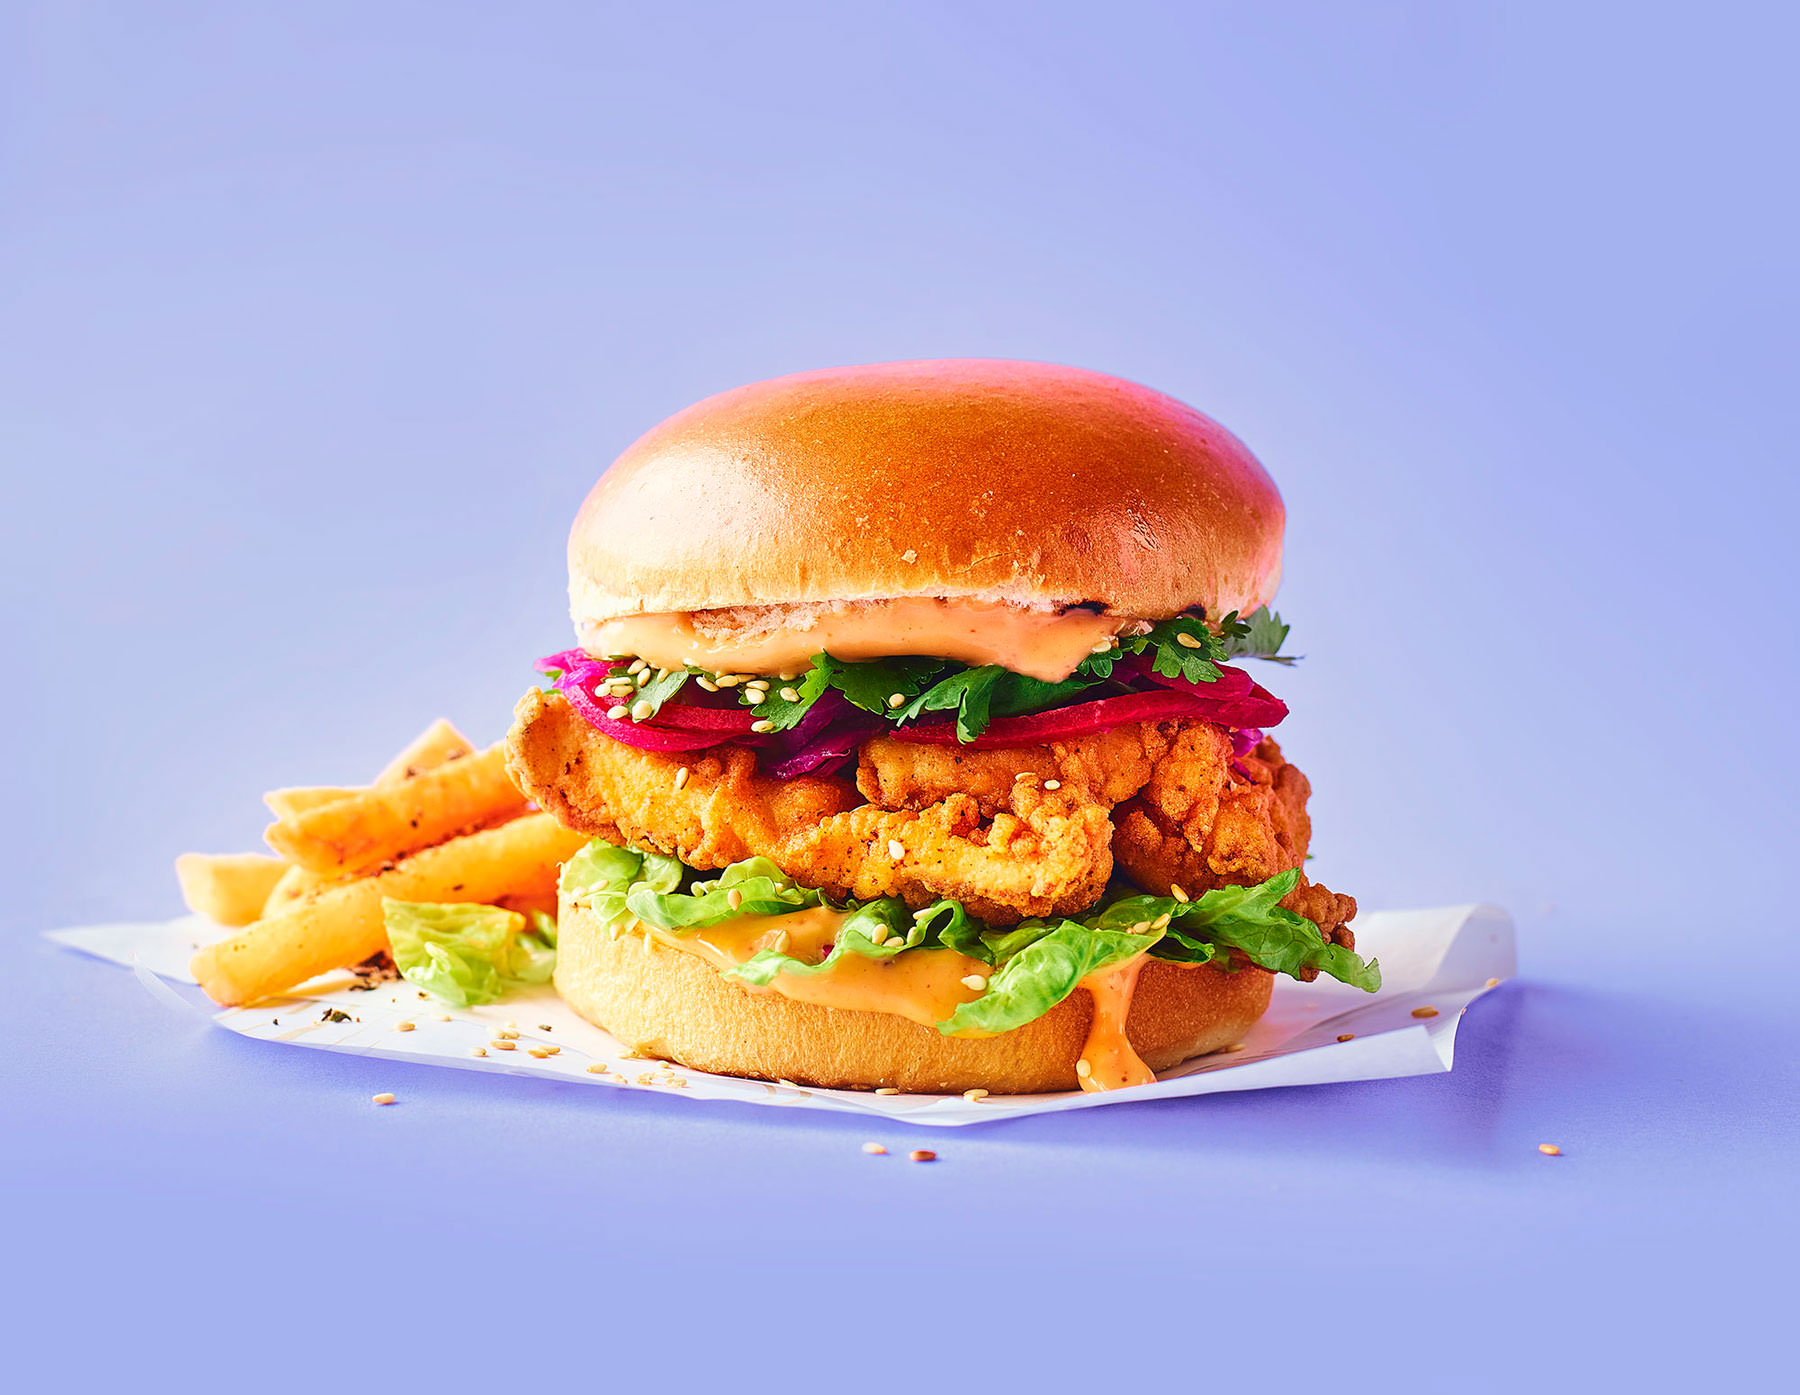 Korean Fried Chicken Burger served with chips, photographed on a lilac backdrop  - London Food & Drinks Photographer